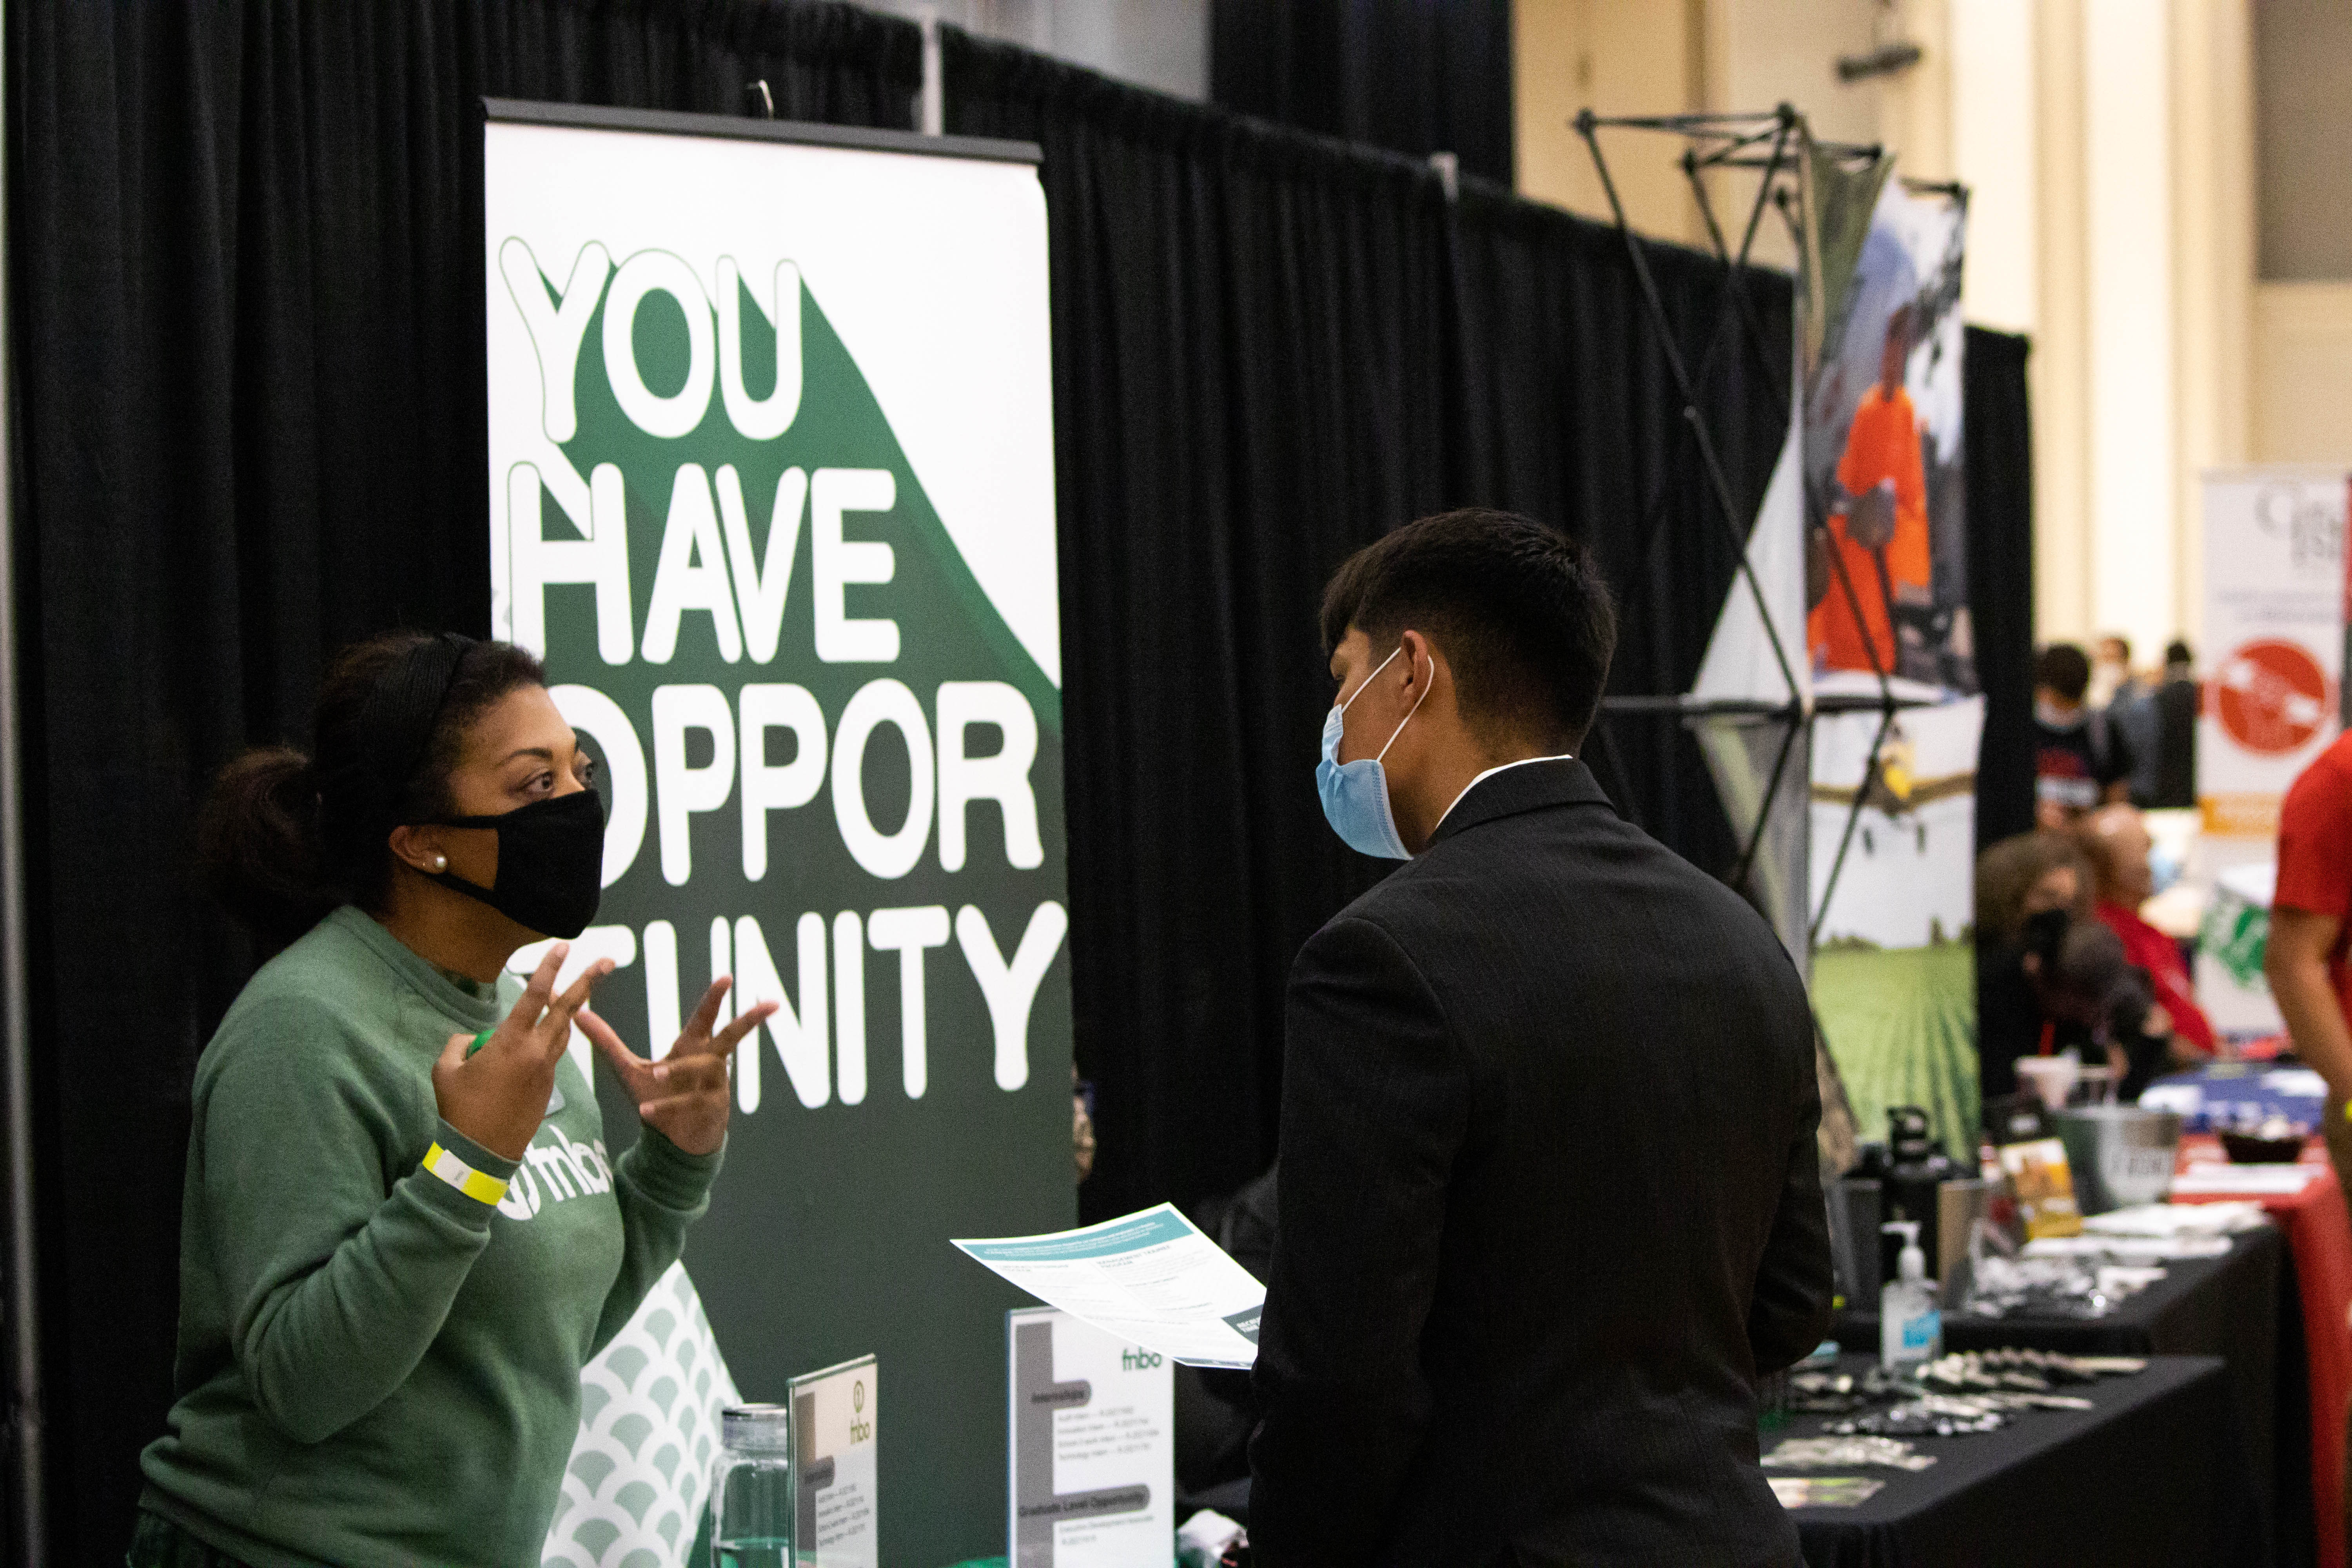 Advisors help connect students to professional opportunities by encouraging them to participate in the Career Fairs.